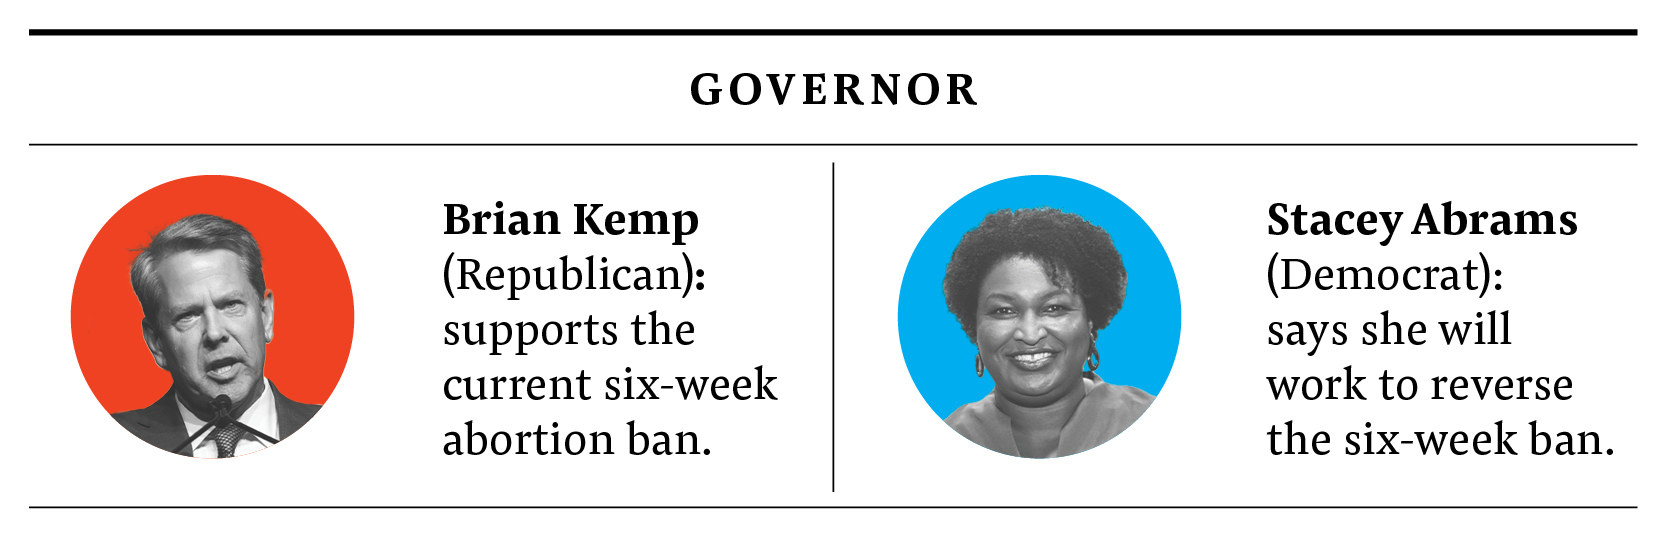 Infographic: Kemp (republican): supports current six-week abortion ban. Abrams (democrat): will work to reverse the six-week abortion ban.